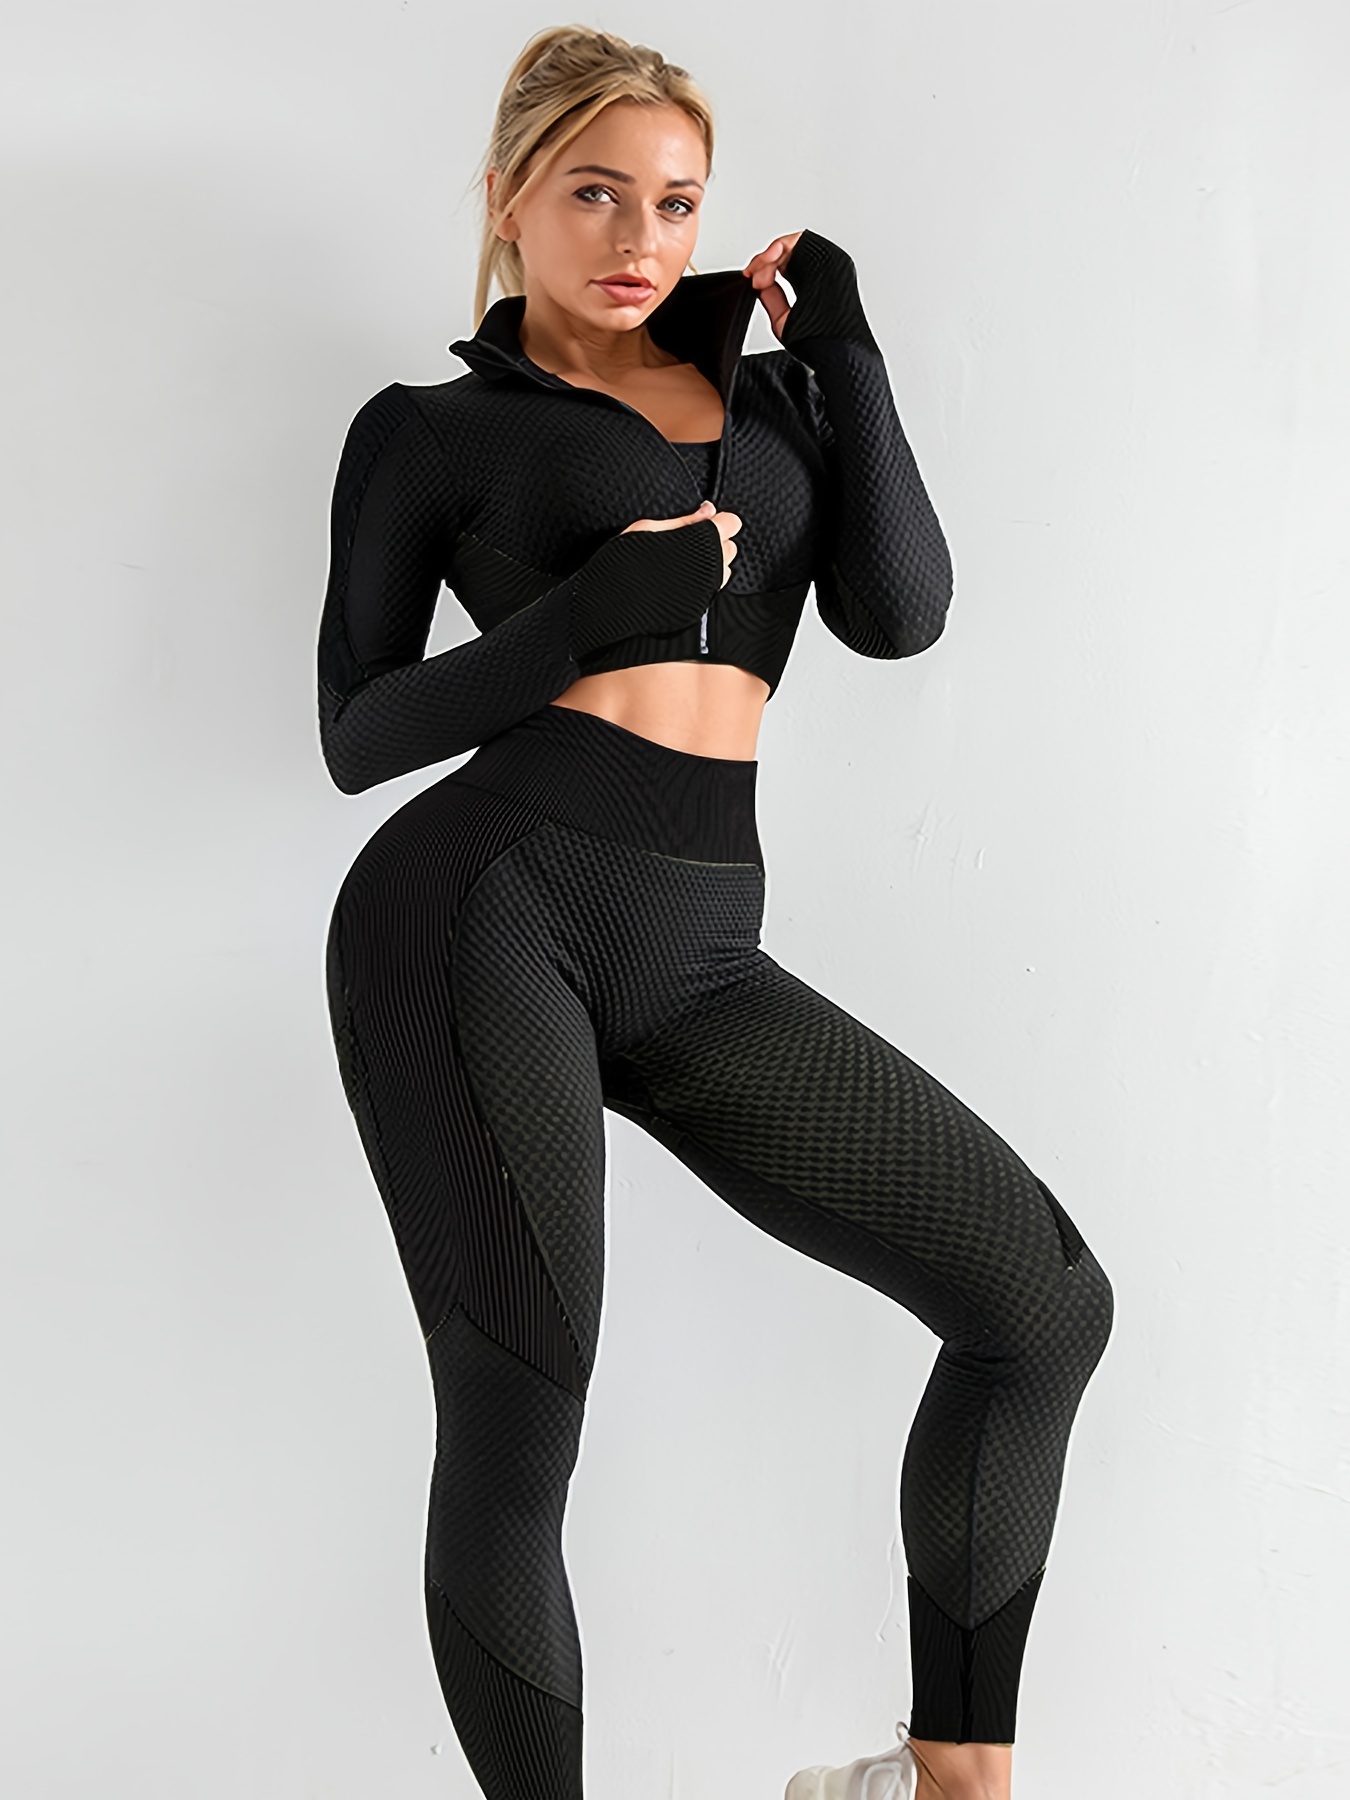 Seamless Yoga Seamless Gym Leggings And Sports Bra Set For Women Perfect  For Gym, Fitness, And Workouts SL L230 From Tracksuit011, $13.82